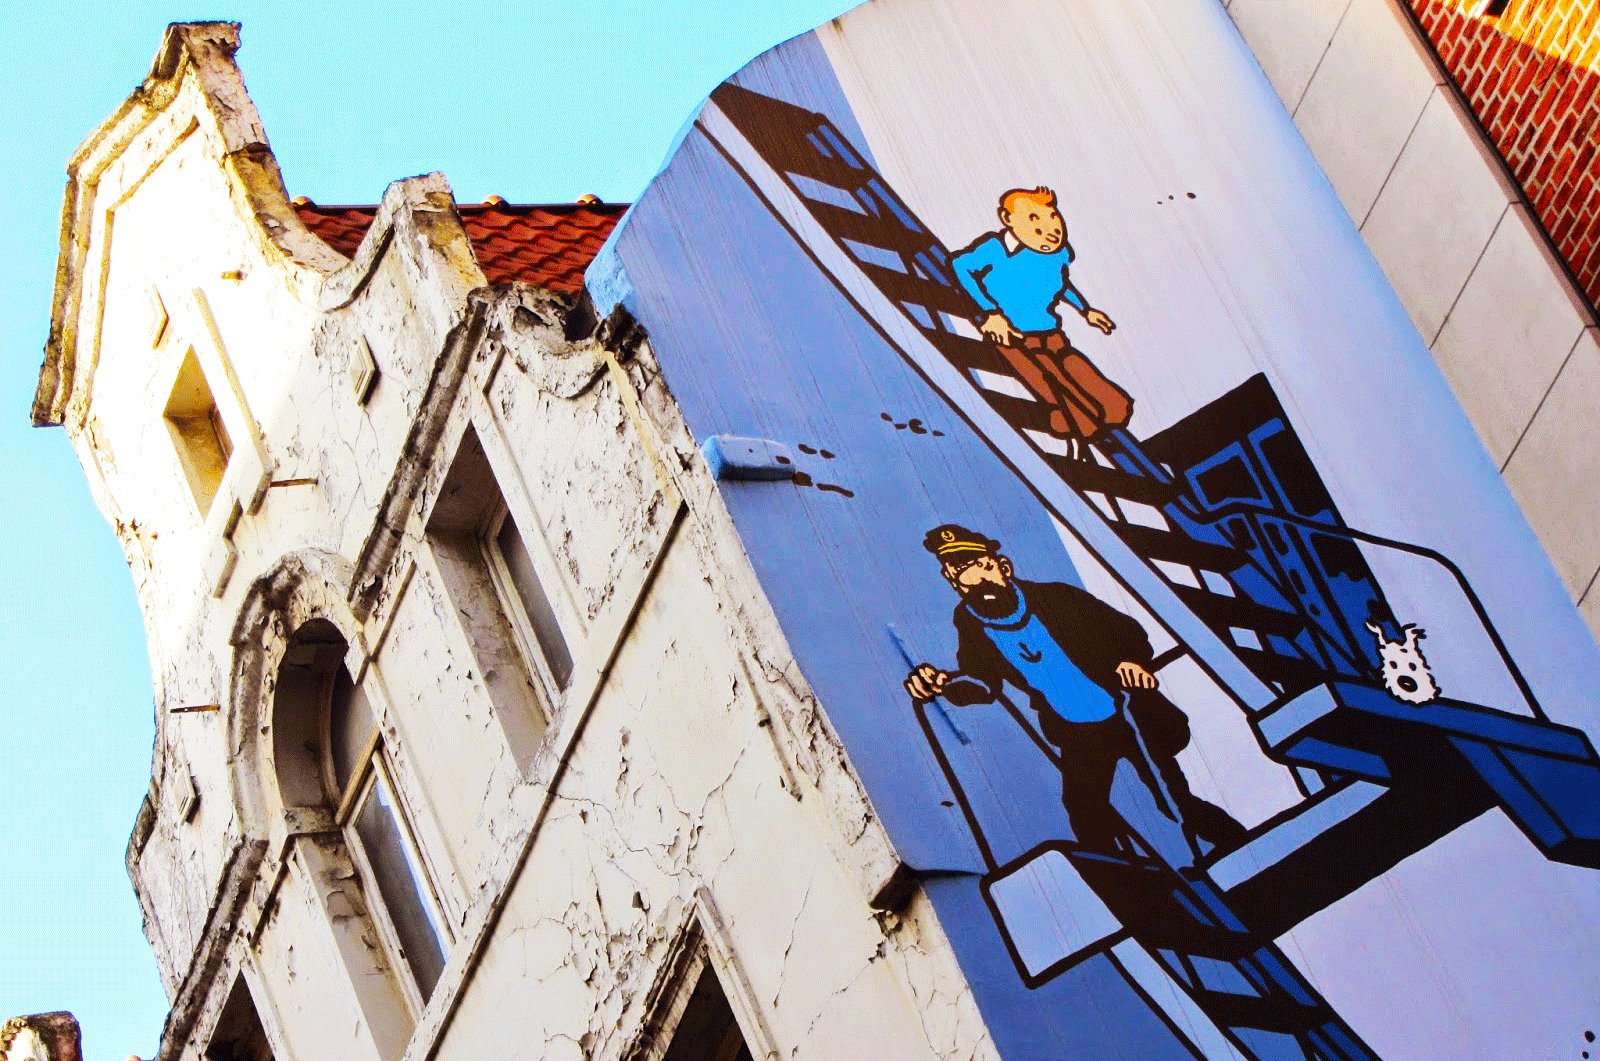 How to take comic strip route in Brussels